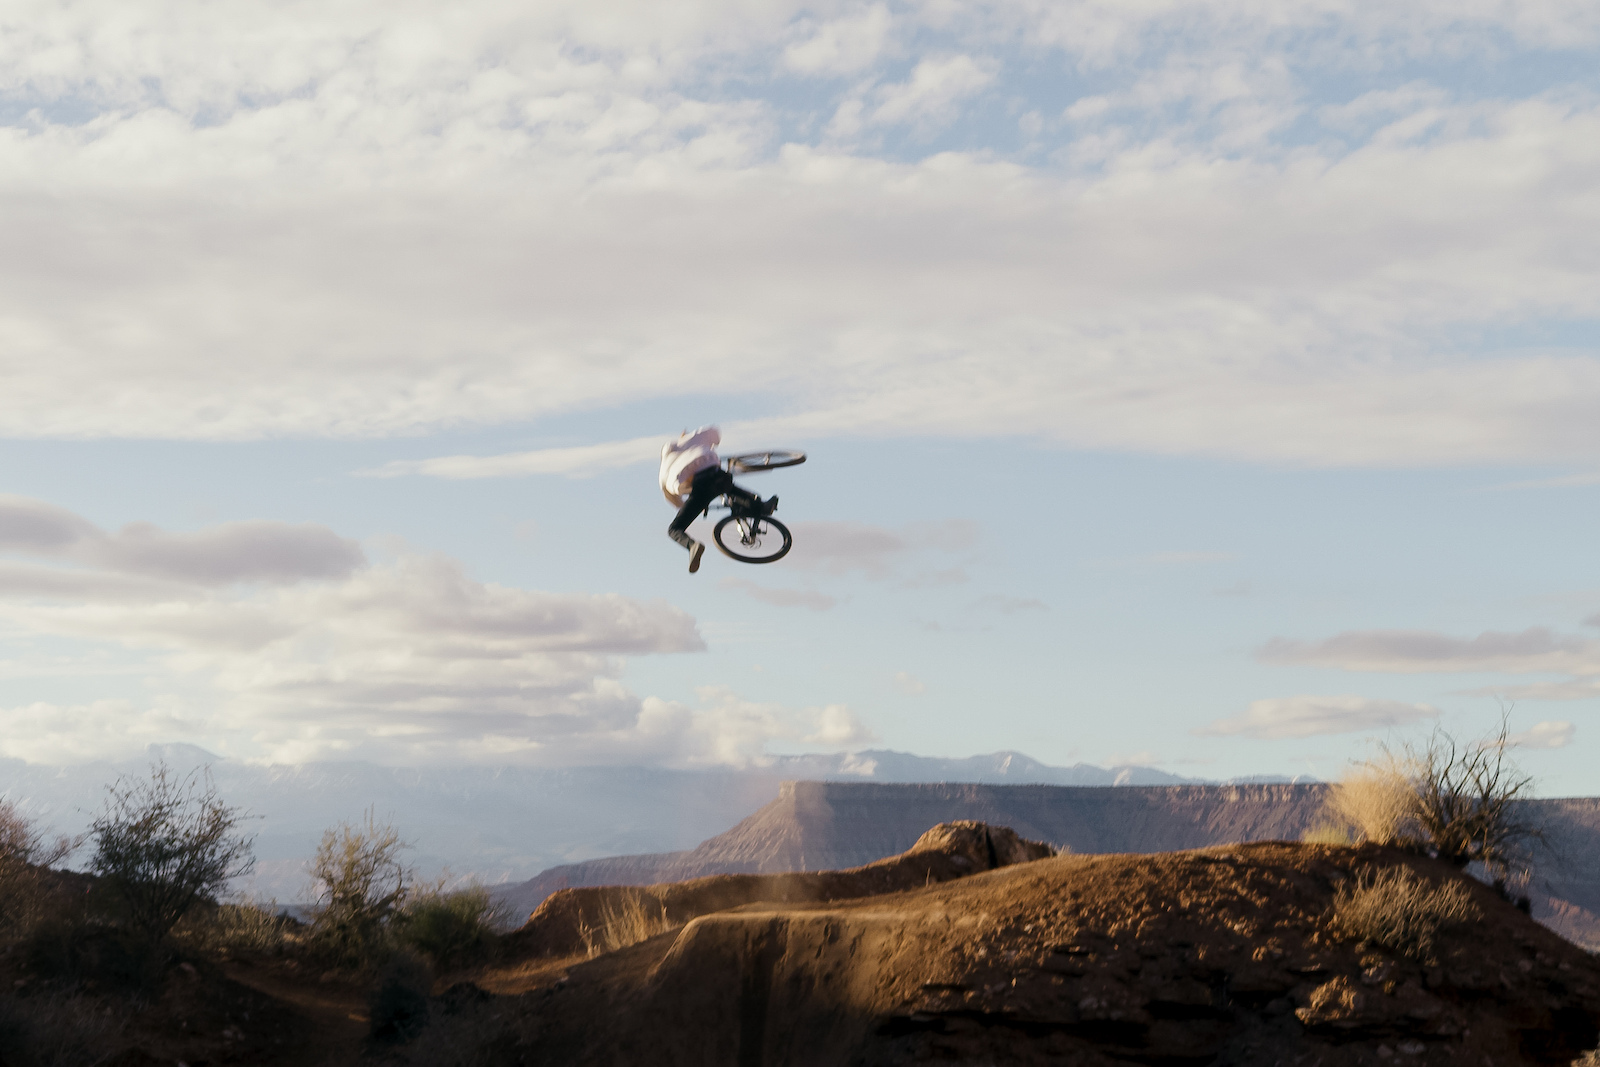 Reed Boggs in Virgin Utah during the filming of Riding Off Cliffs Craig Grant